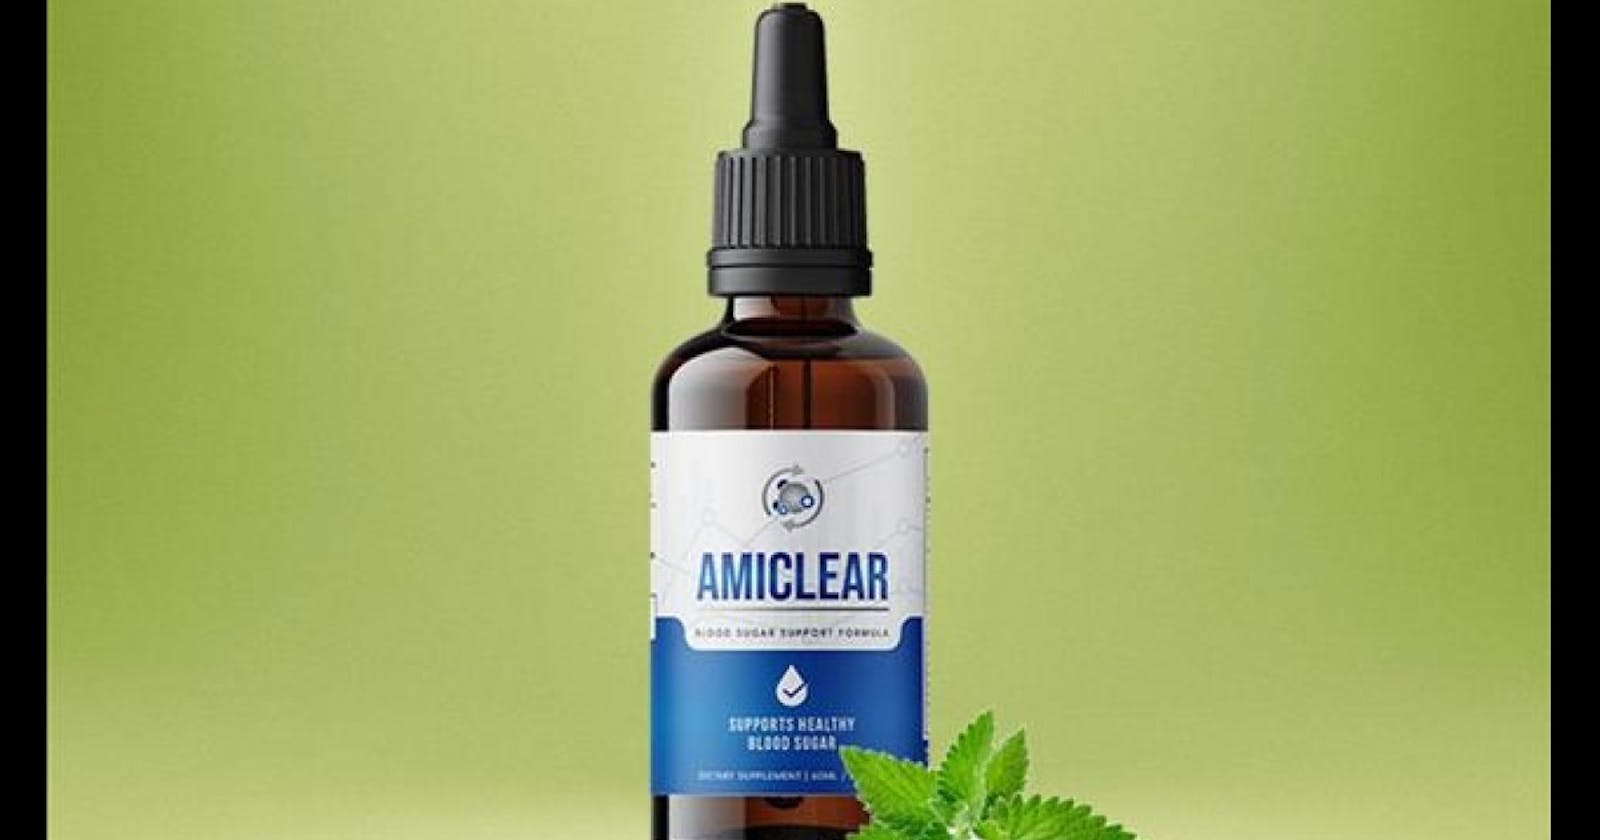 Amiclear - Blood Sugar Results, Uses, Ingredients, Scam Or Legit?